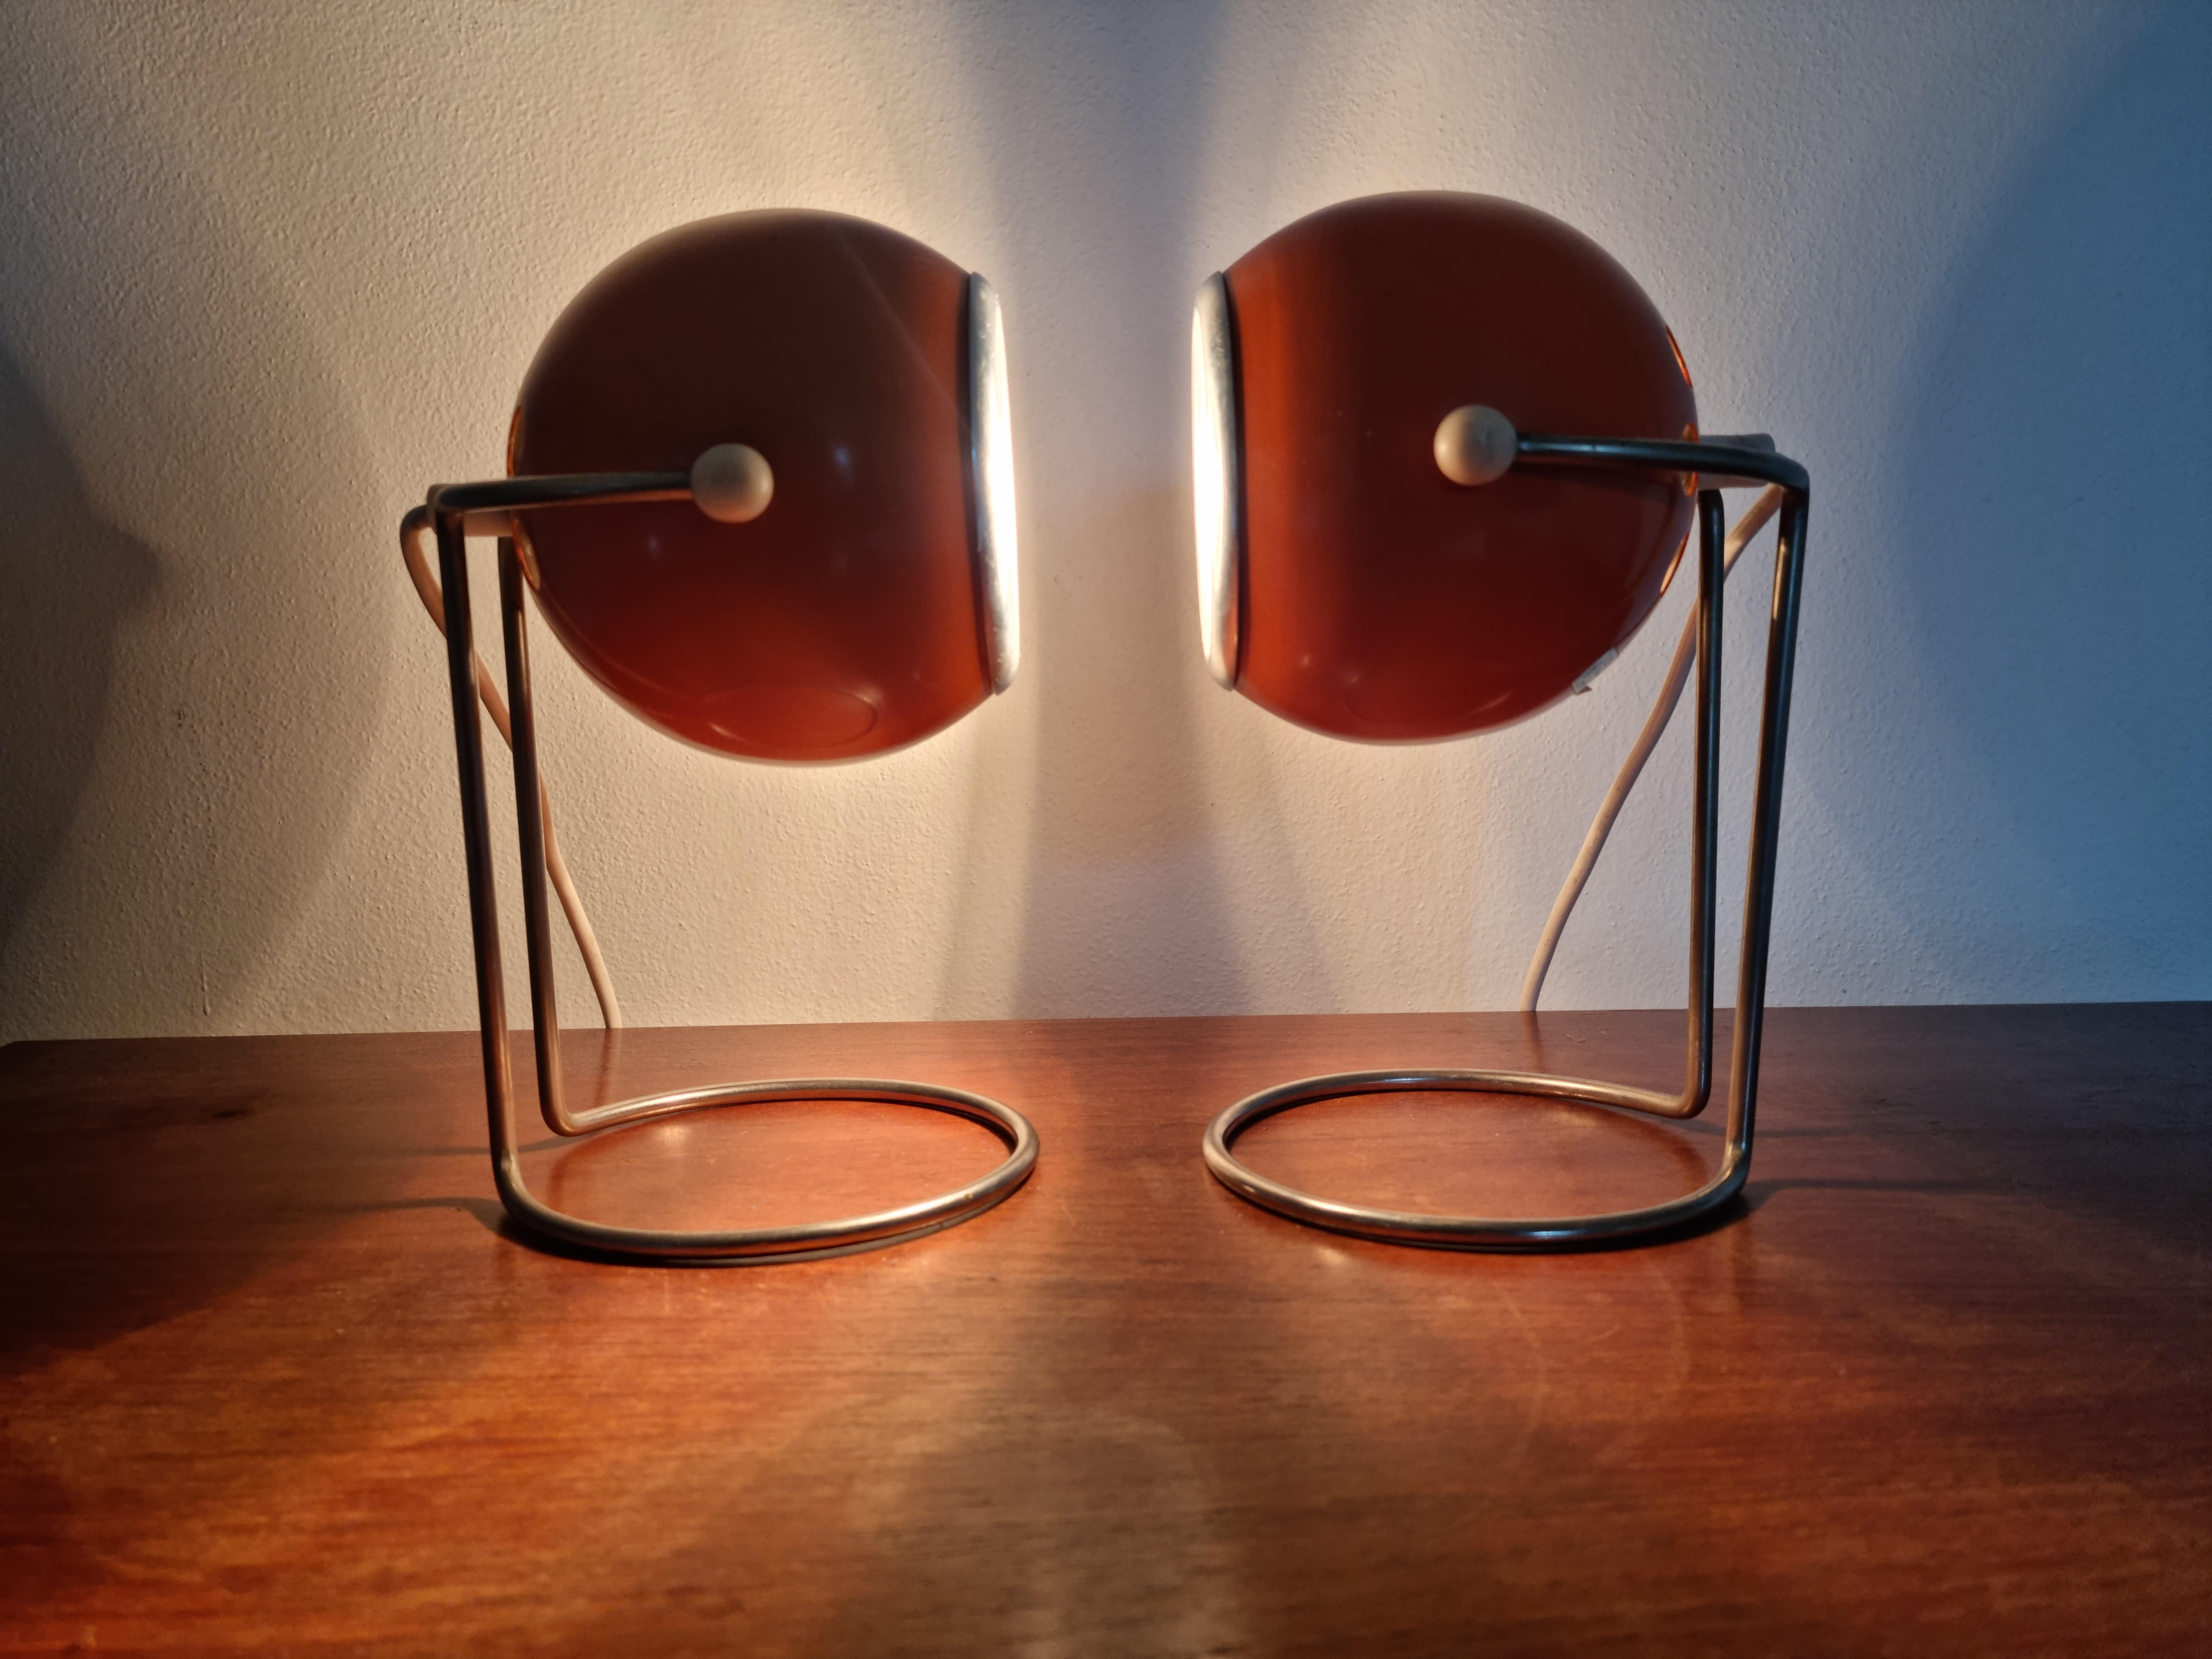 Pair of Midcentury Table Lamps, Eye Ball, 1970s For Sale 7